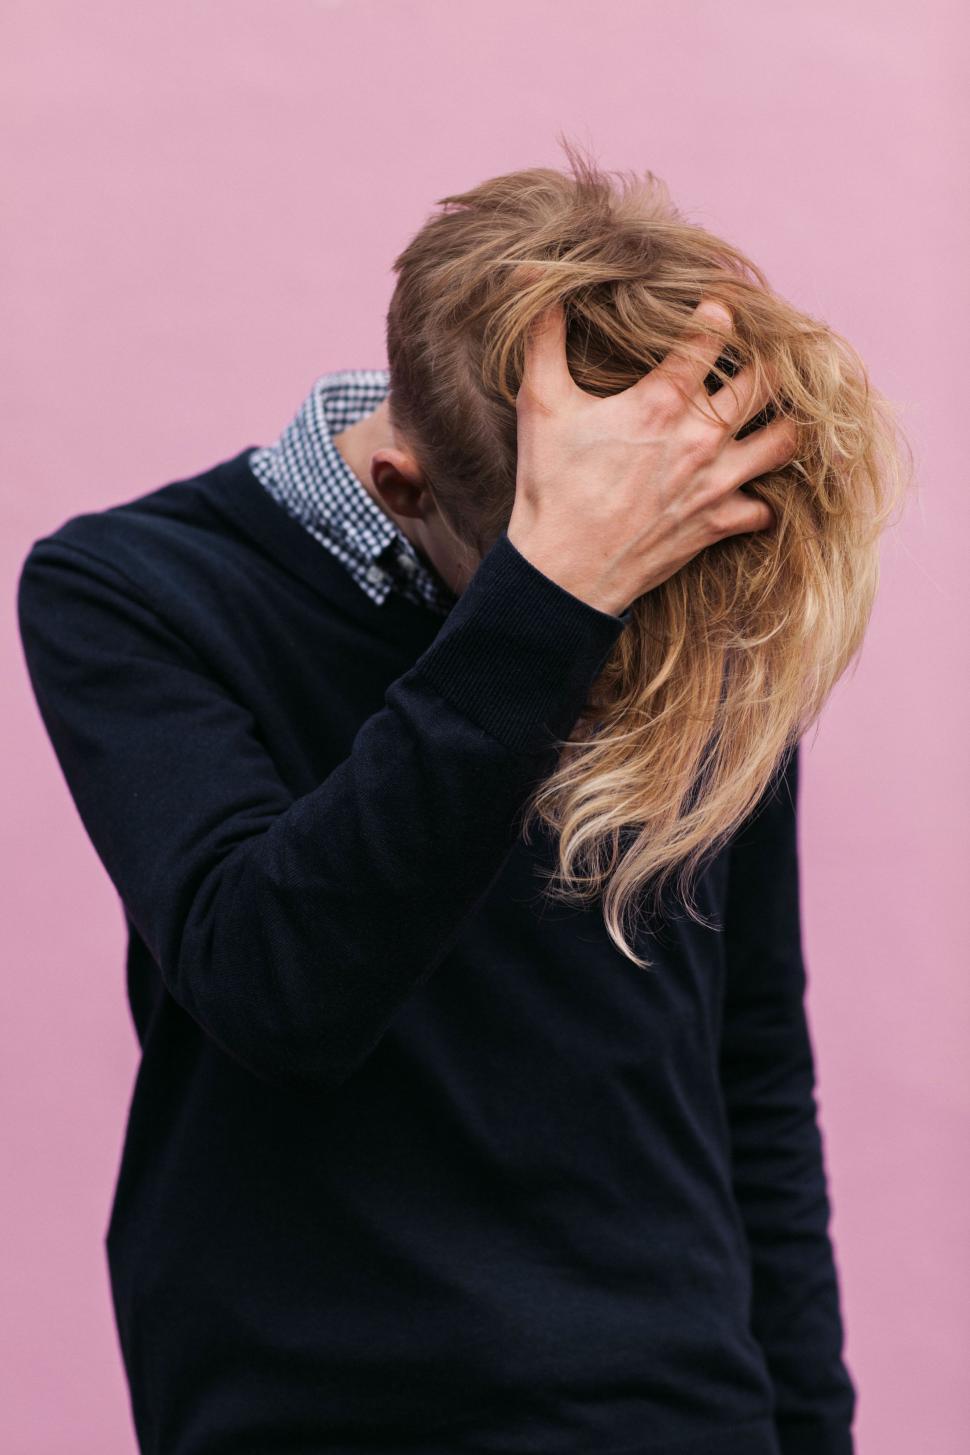 Free Image of Woman Covering Her Face With Hands 